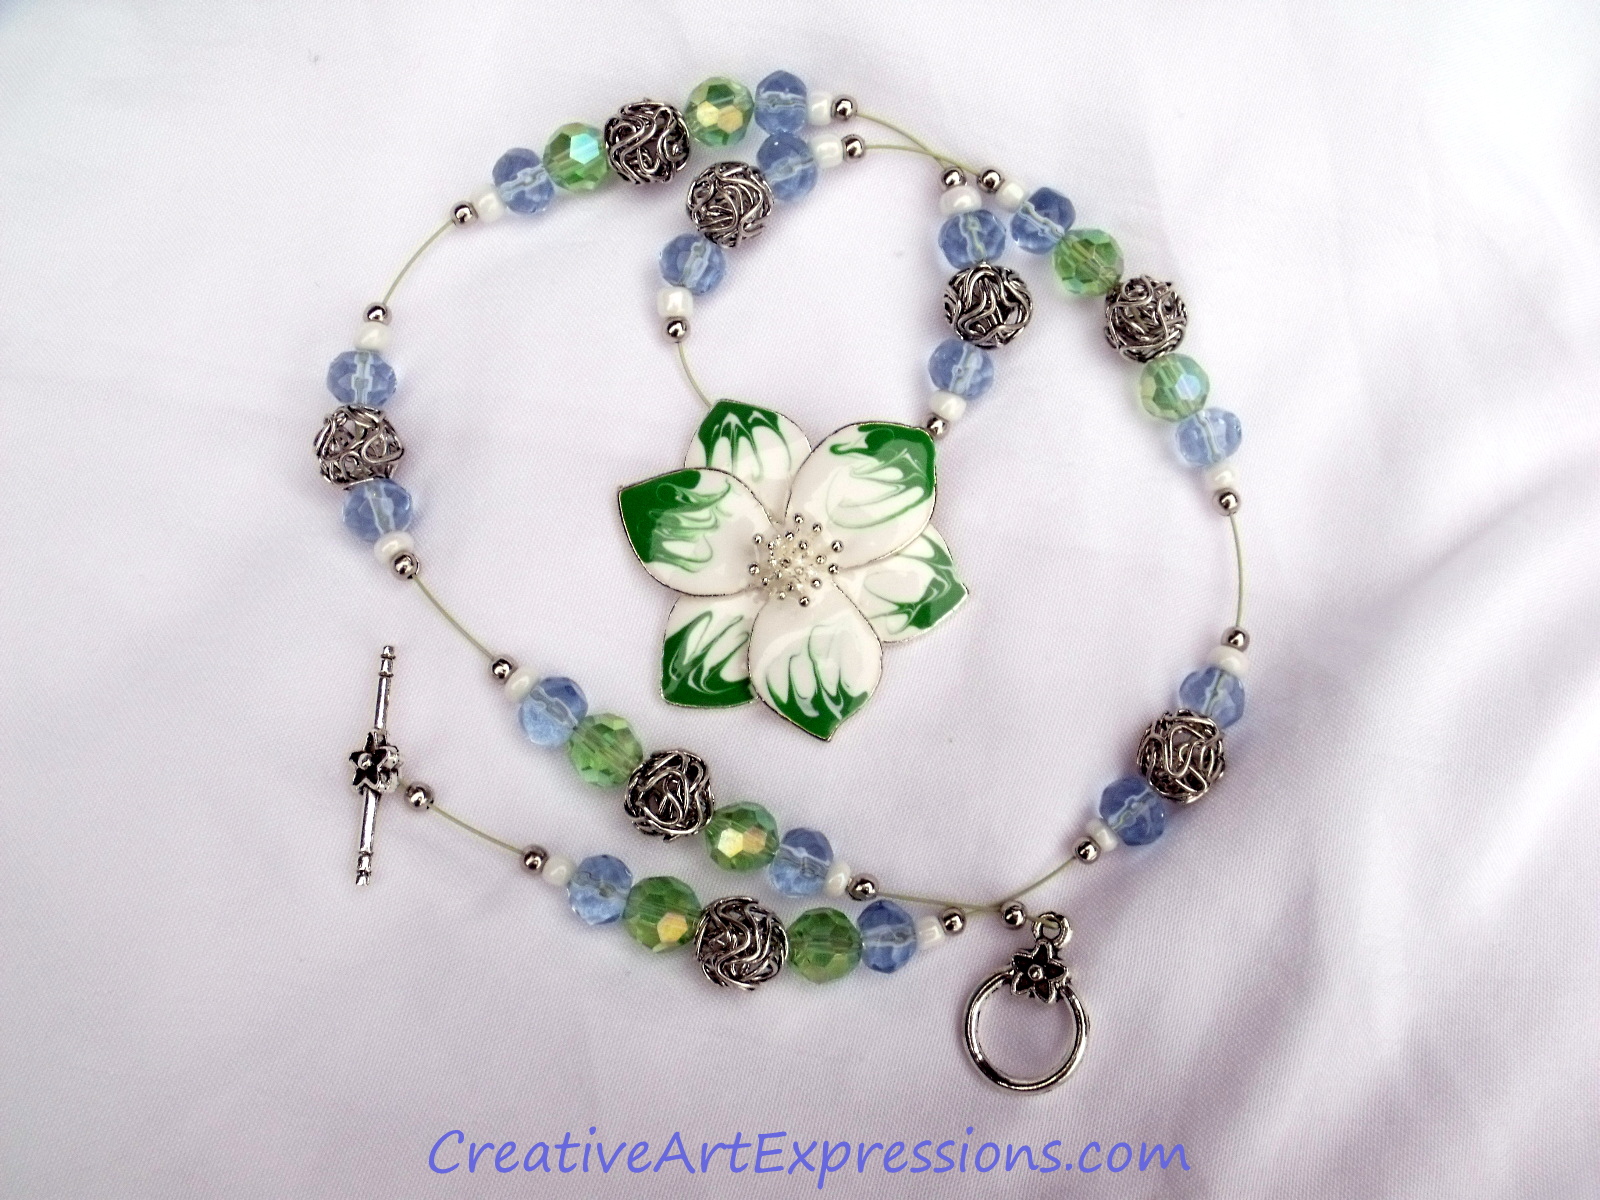 Creative Art Expressions Handmade Green & White Flower Necklace